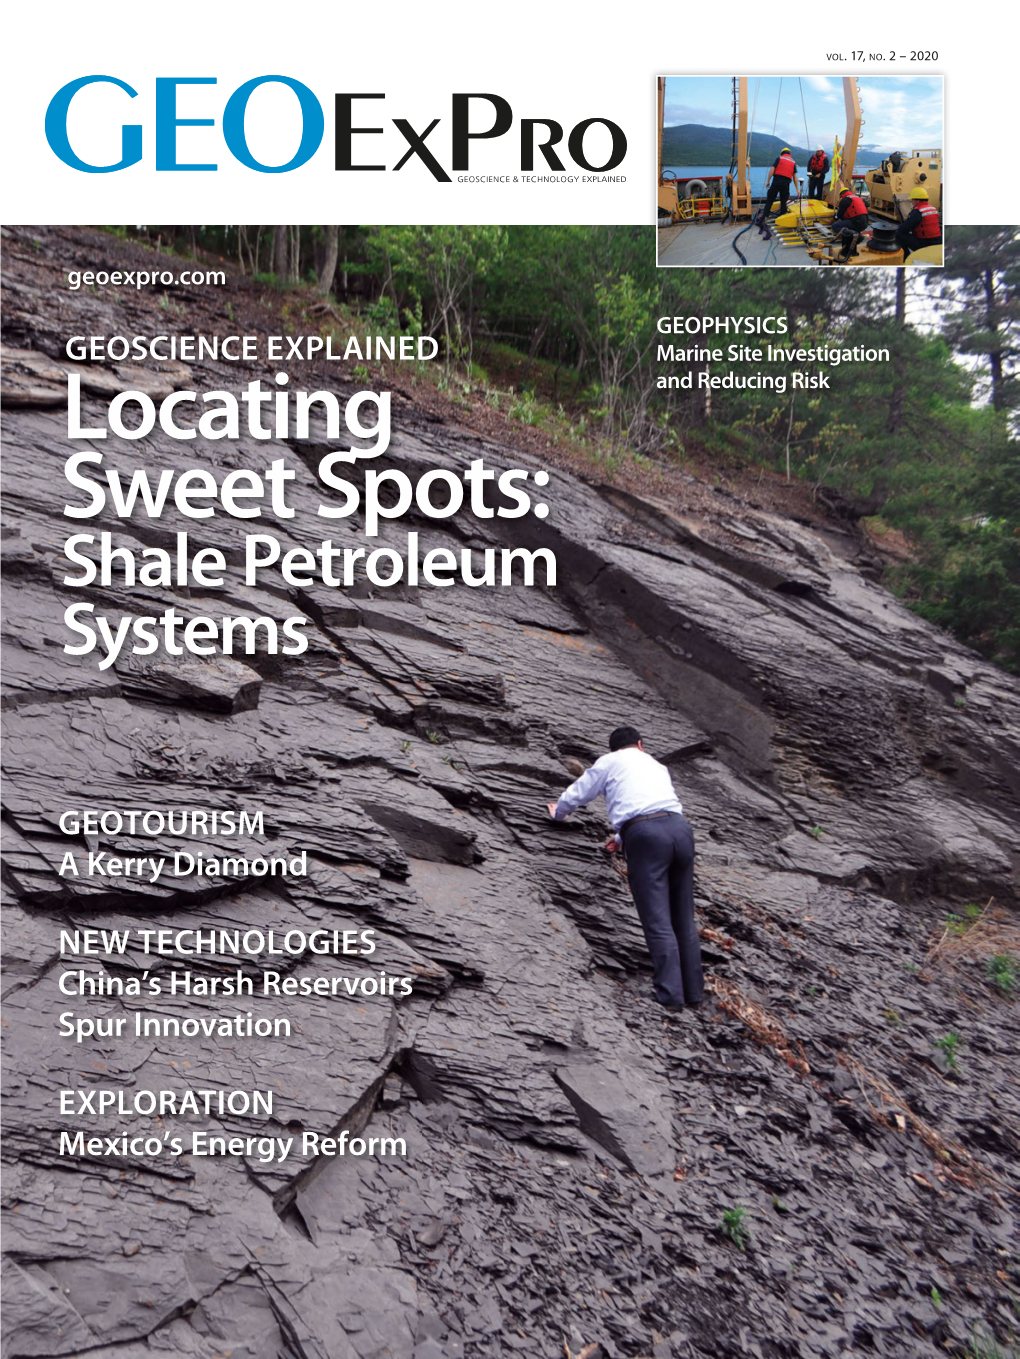 Locating Sweet Spots: Shale Must Respond and Adapt to Industry Petroleum Systems Needs to Cope with the Digital Transition